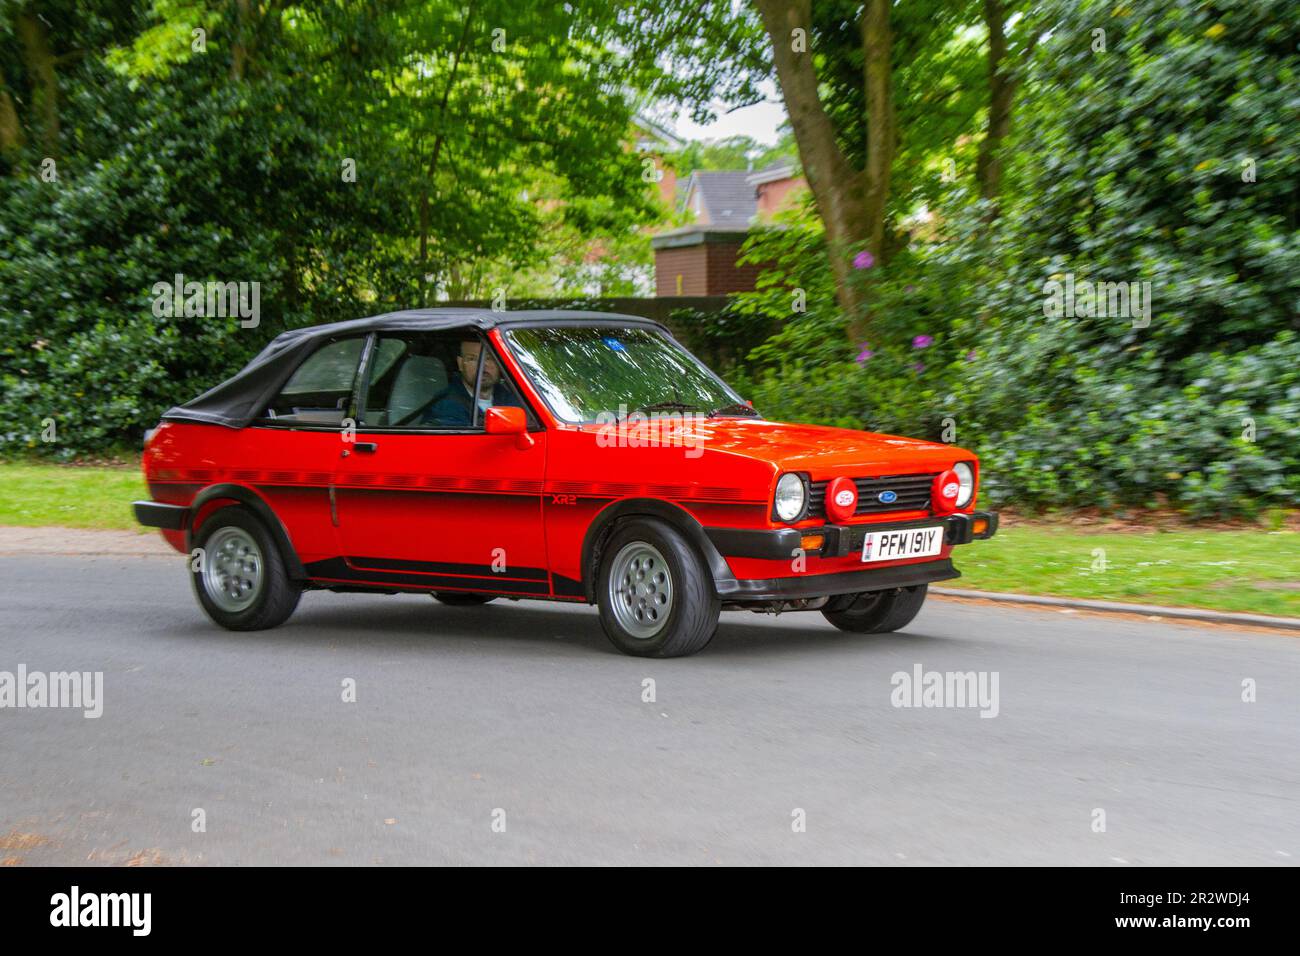 1983 80s eighties Red FORD ESCORT RS  1598cc Petrol cabriolet; at the Lytham St Annes Classic & Performance Motor vehicle show displays of classic cars, UK Stock Photo